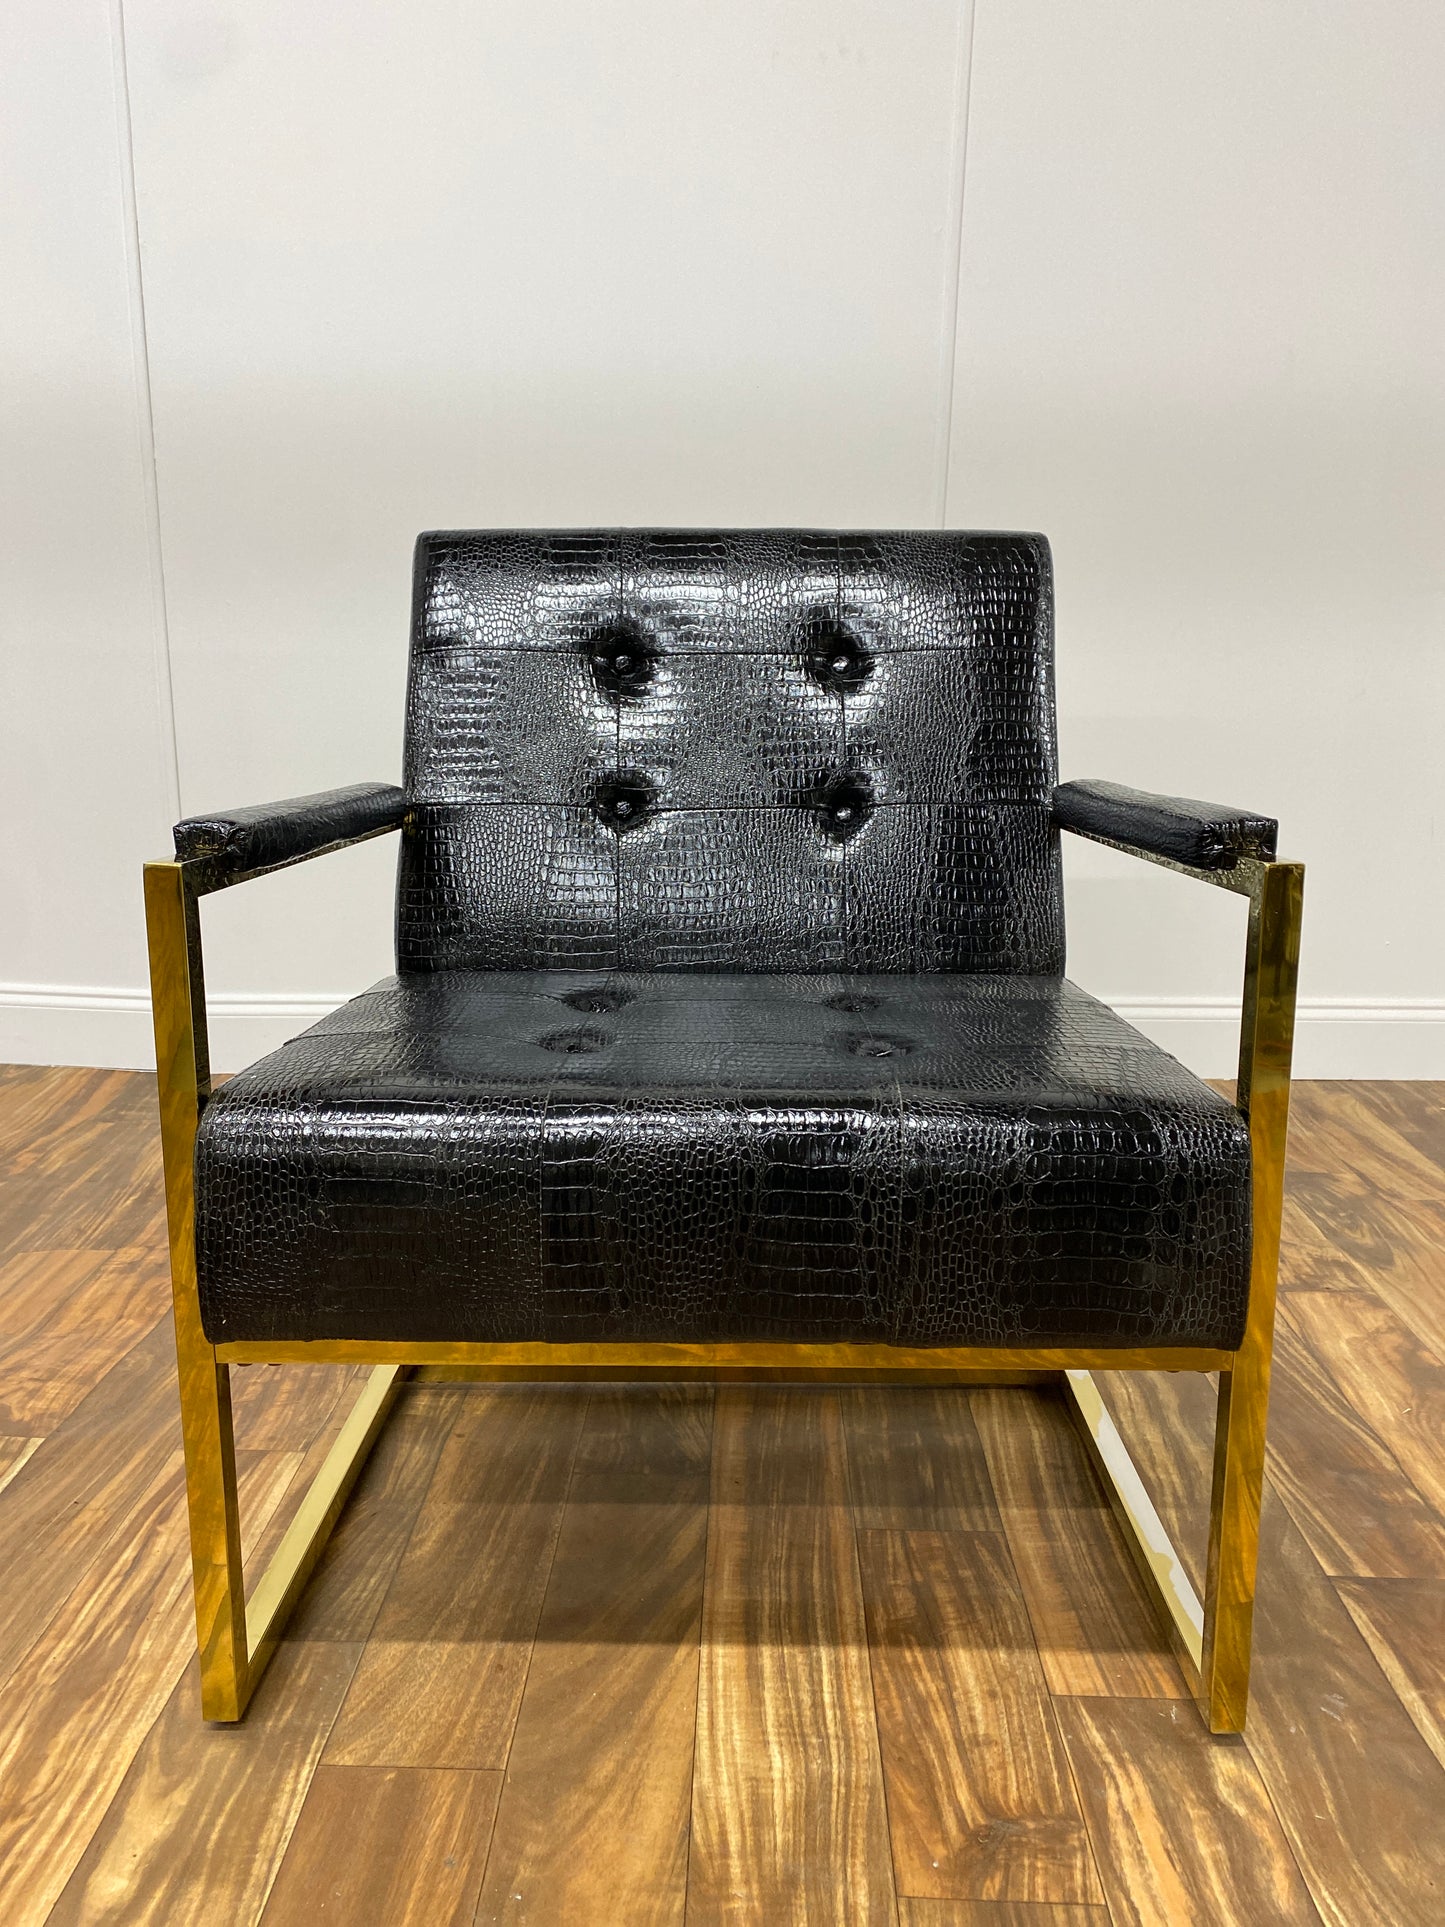 BLACK ALLIGATOR SKIN ACCENT ARM CHAIR WITH GOLD LEGS